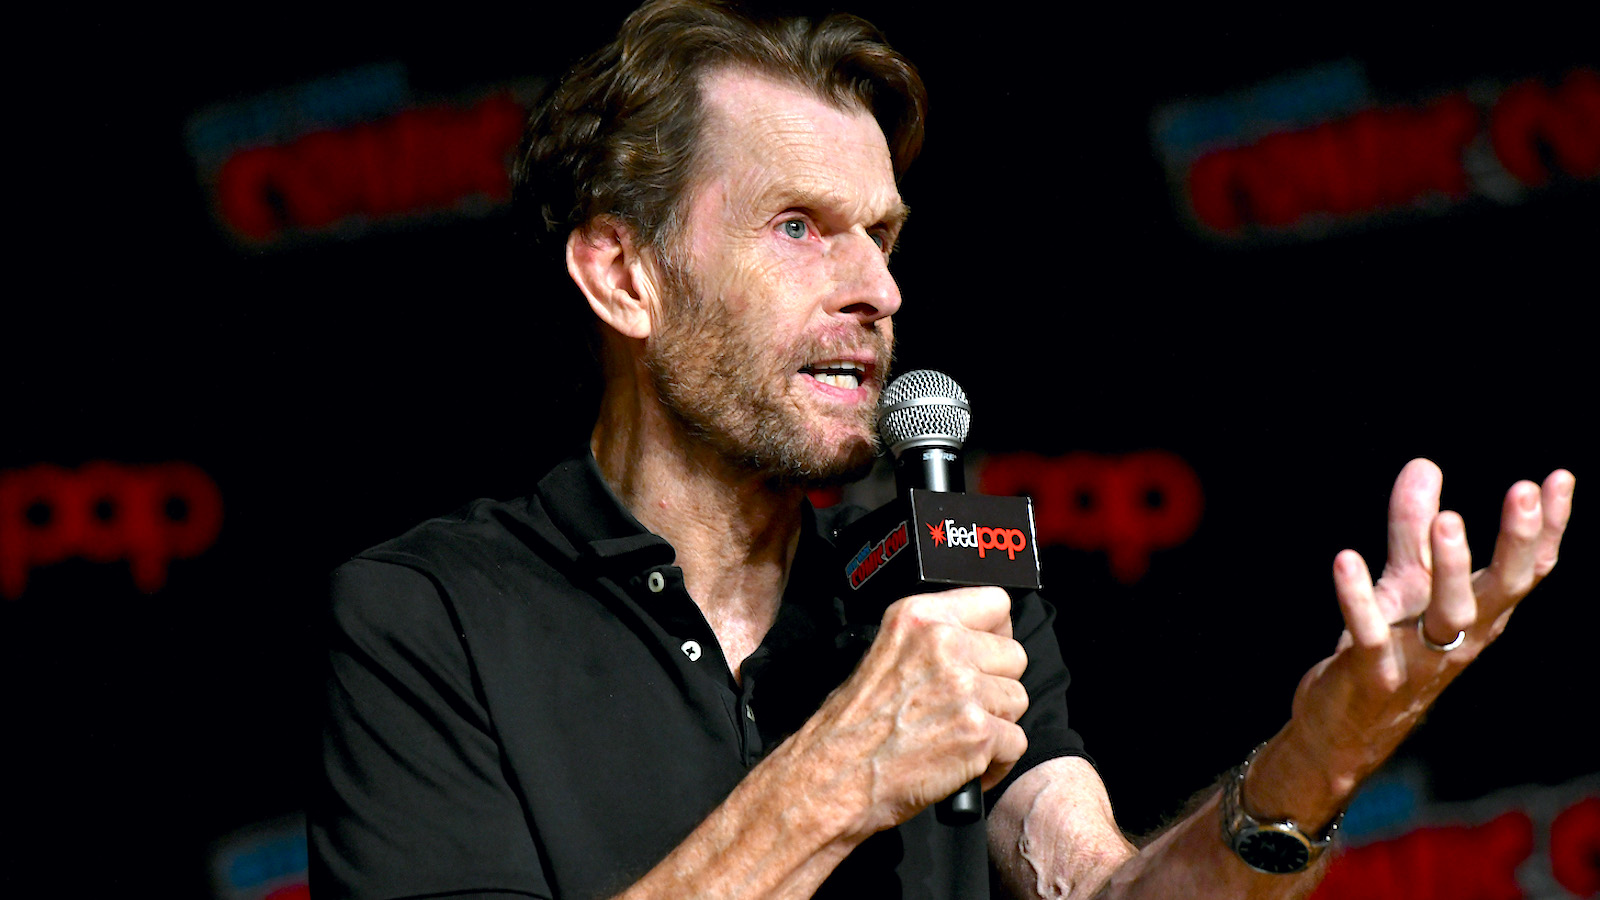 Kevin Conroy speaking into a microphone in a black polo shirt